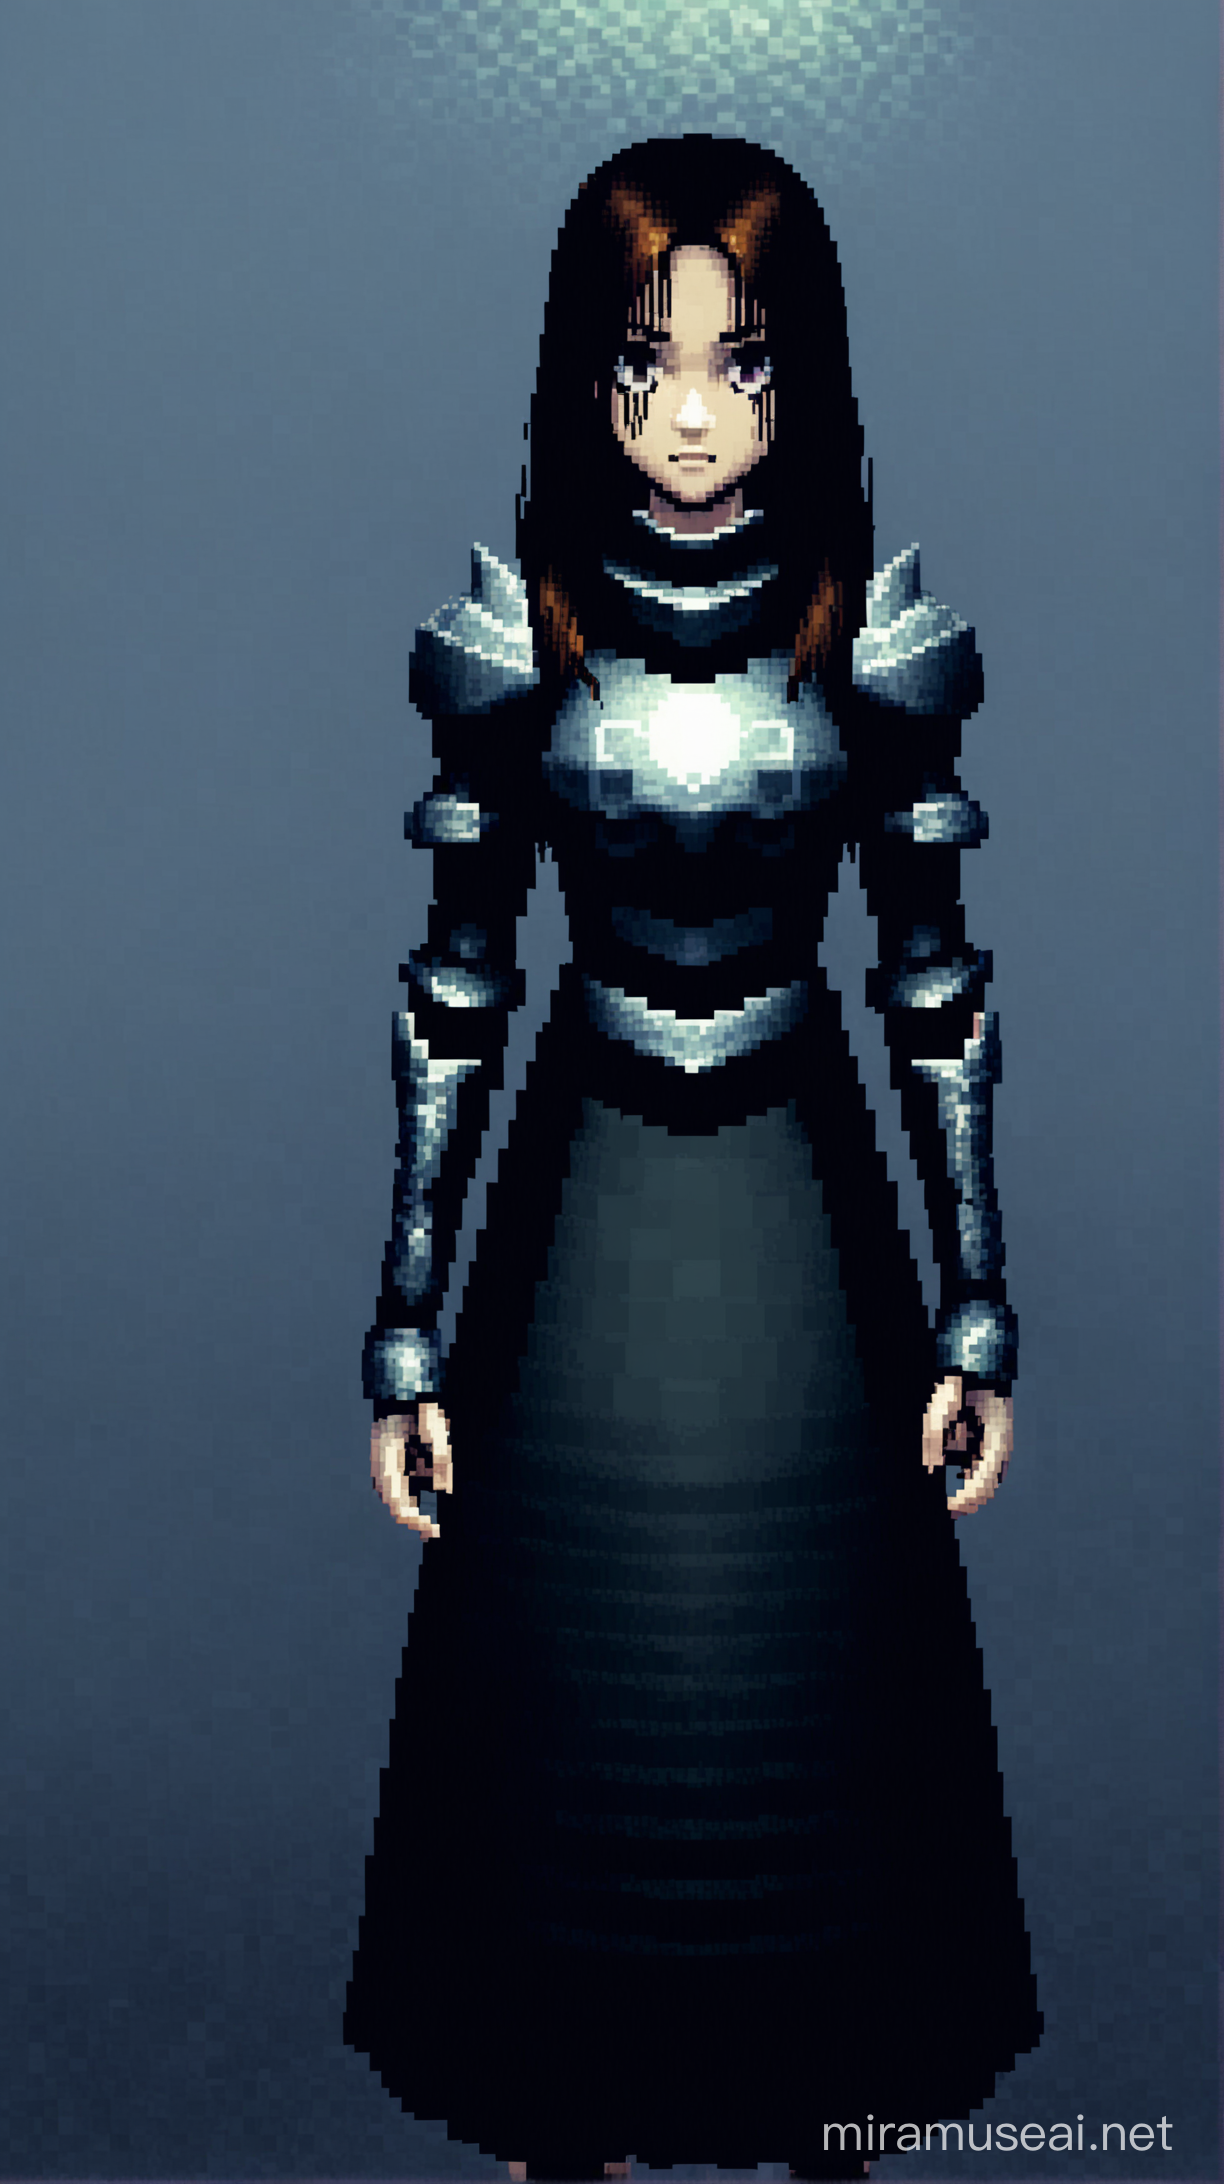 a person in a old ps2 game pixelated of close-up {subject}, ps1 psx gamecube game, female protagonist, screencapture, low poly, pixelated, ps2, playstation, gothic dress, fatal frame, dark, nostalgia, foggy, detailed, metal armour, ginger long hair, knife